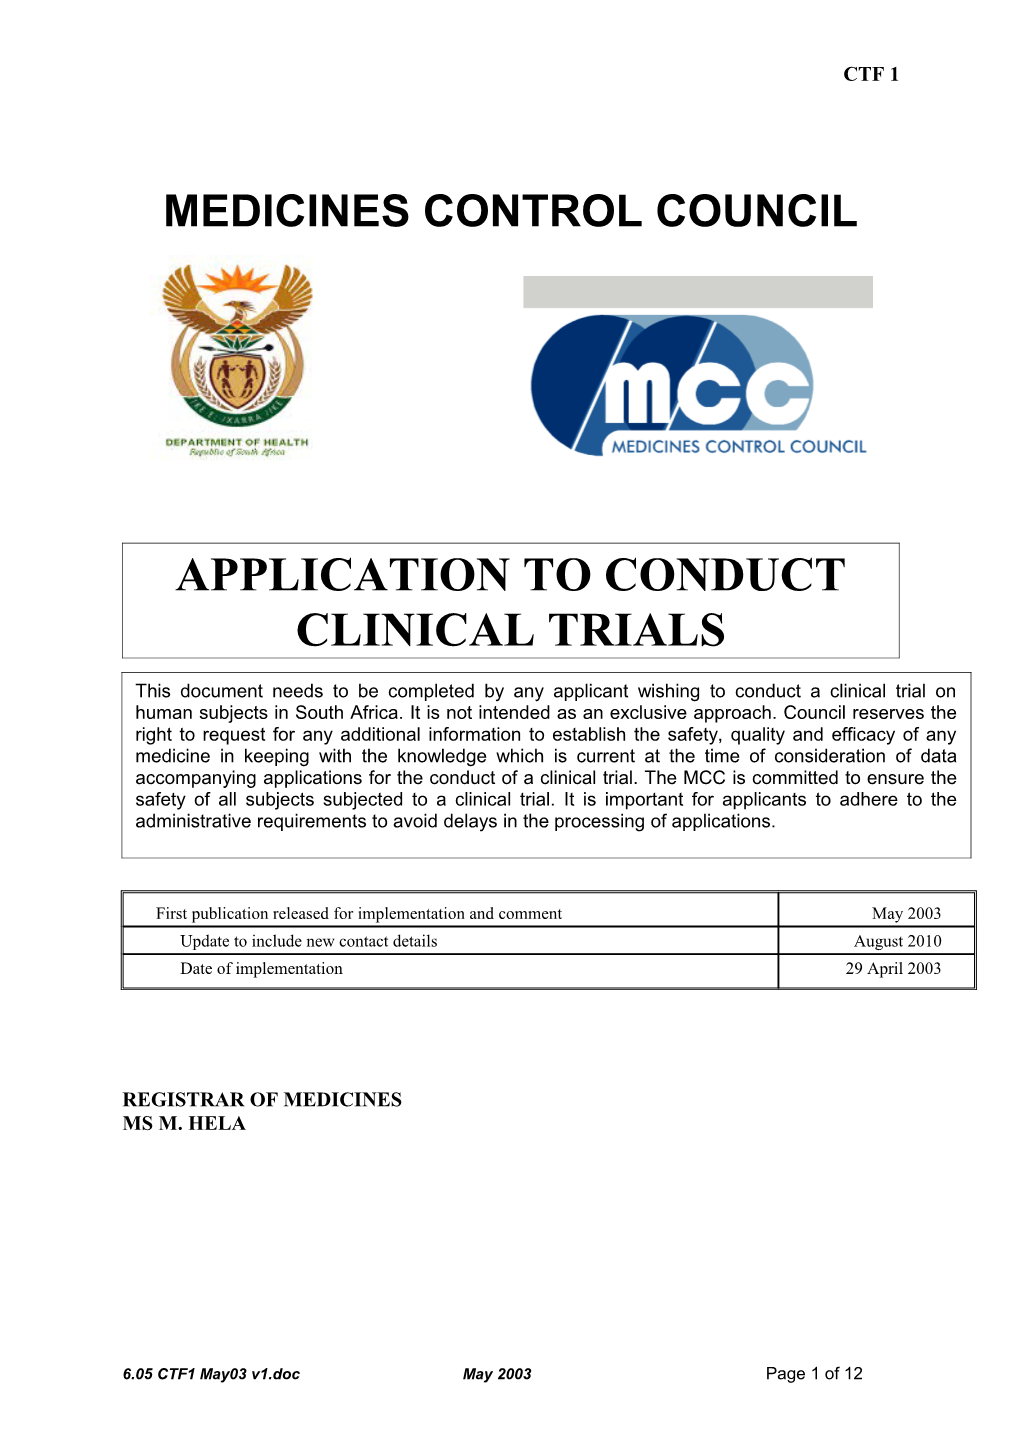 Application to Conduct Clinical Trials